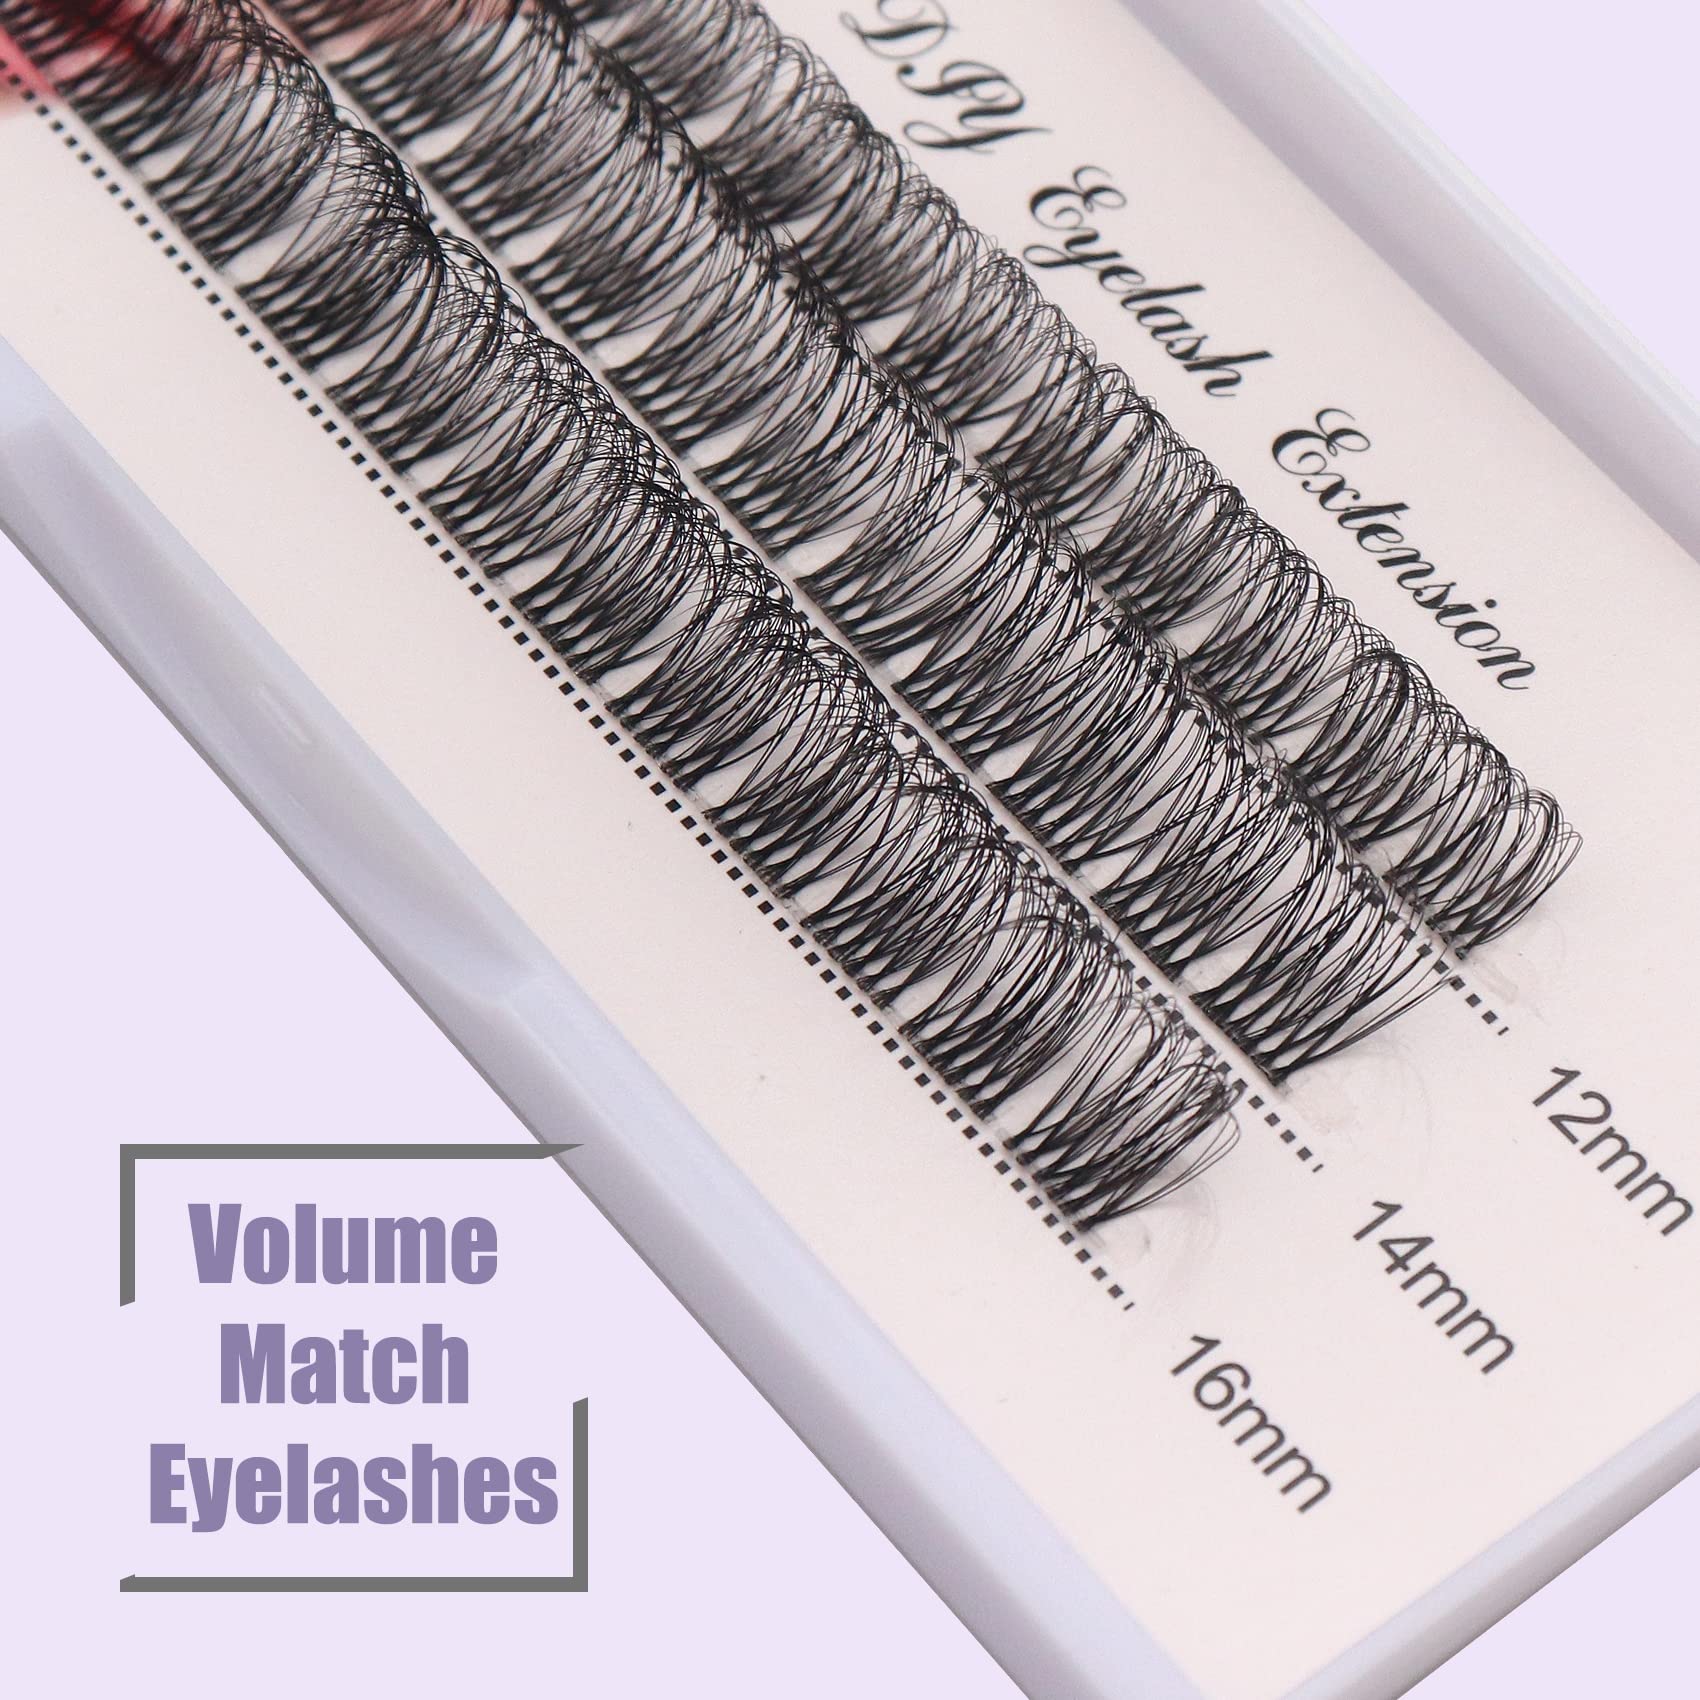 Veleasha DIY Eyelash Extension Individual Lashes with Clear Band D Curl Lash Extension Strip 39 Clusters Reusable Wispy False Eyelashes for Personal DIY at Home / FD02 12-16MM